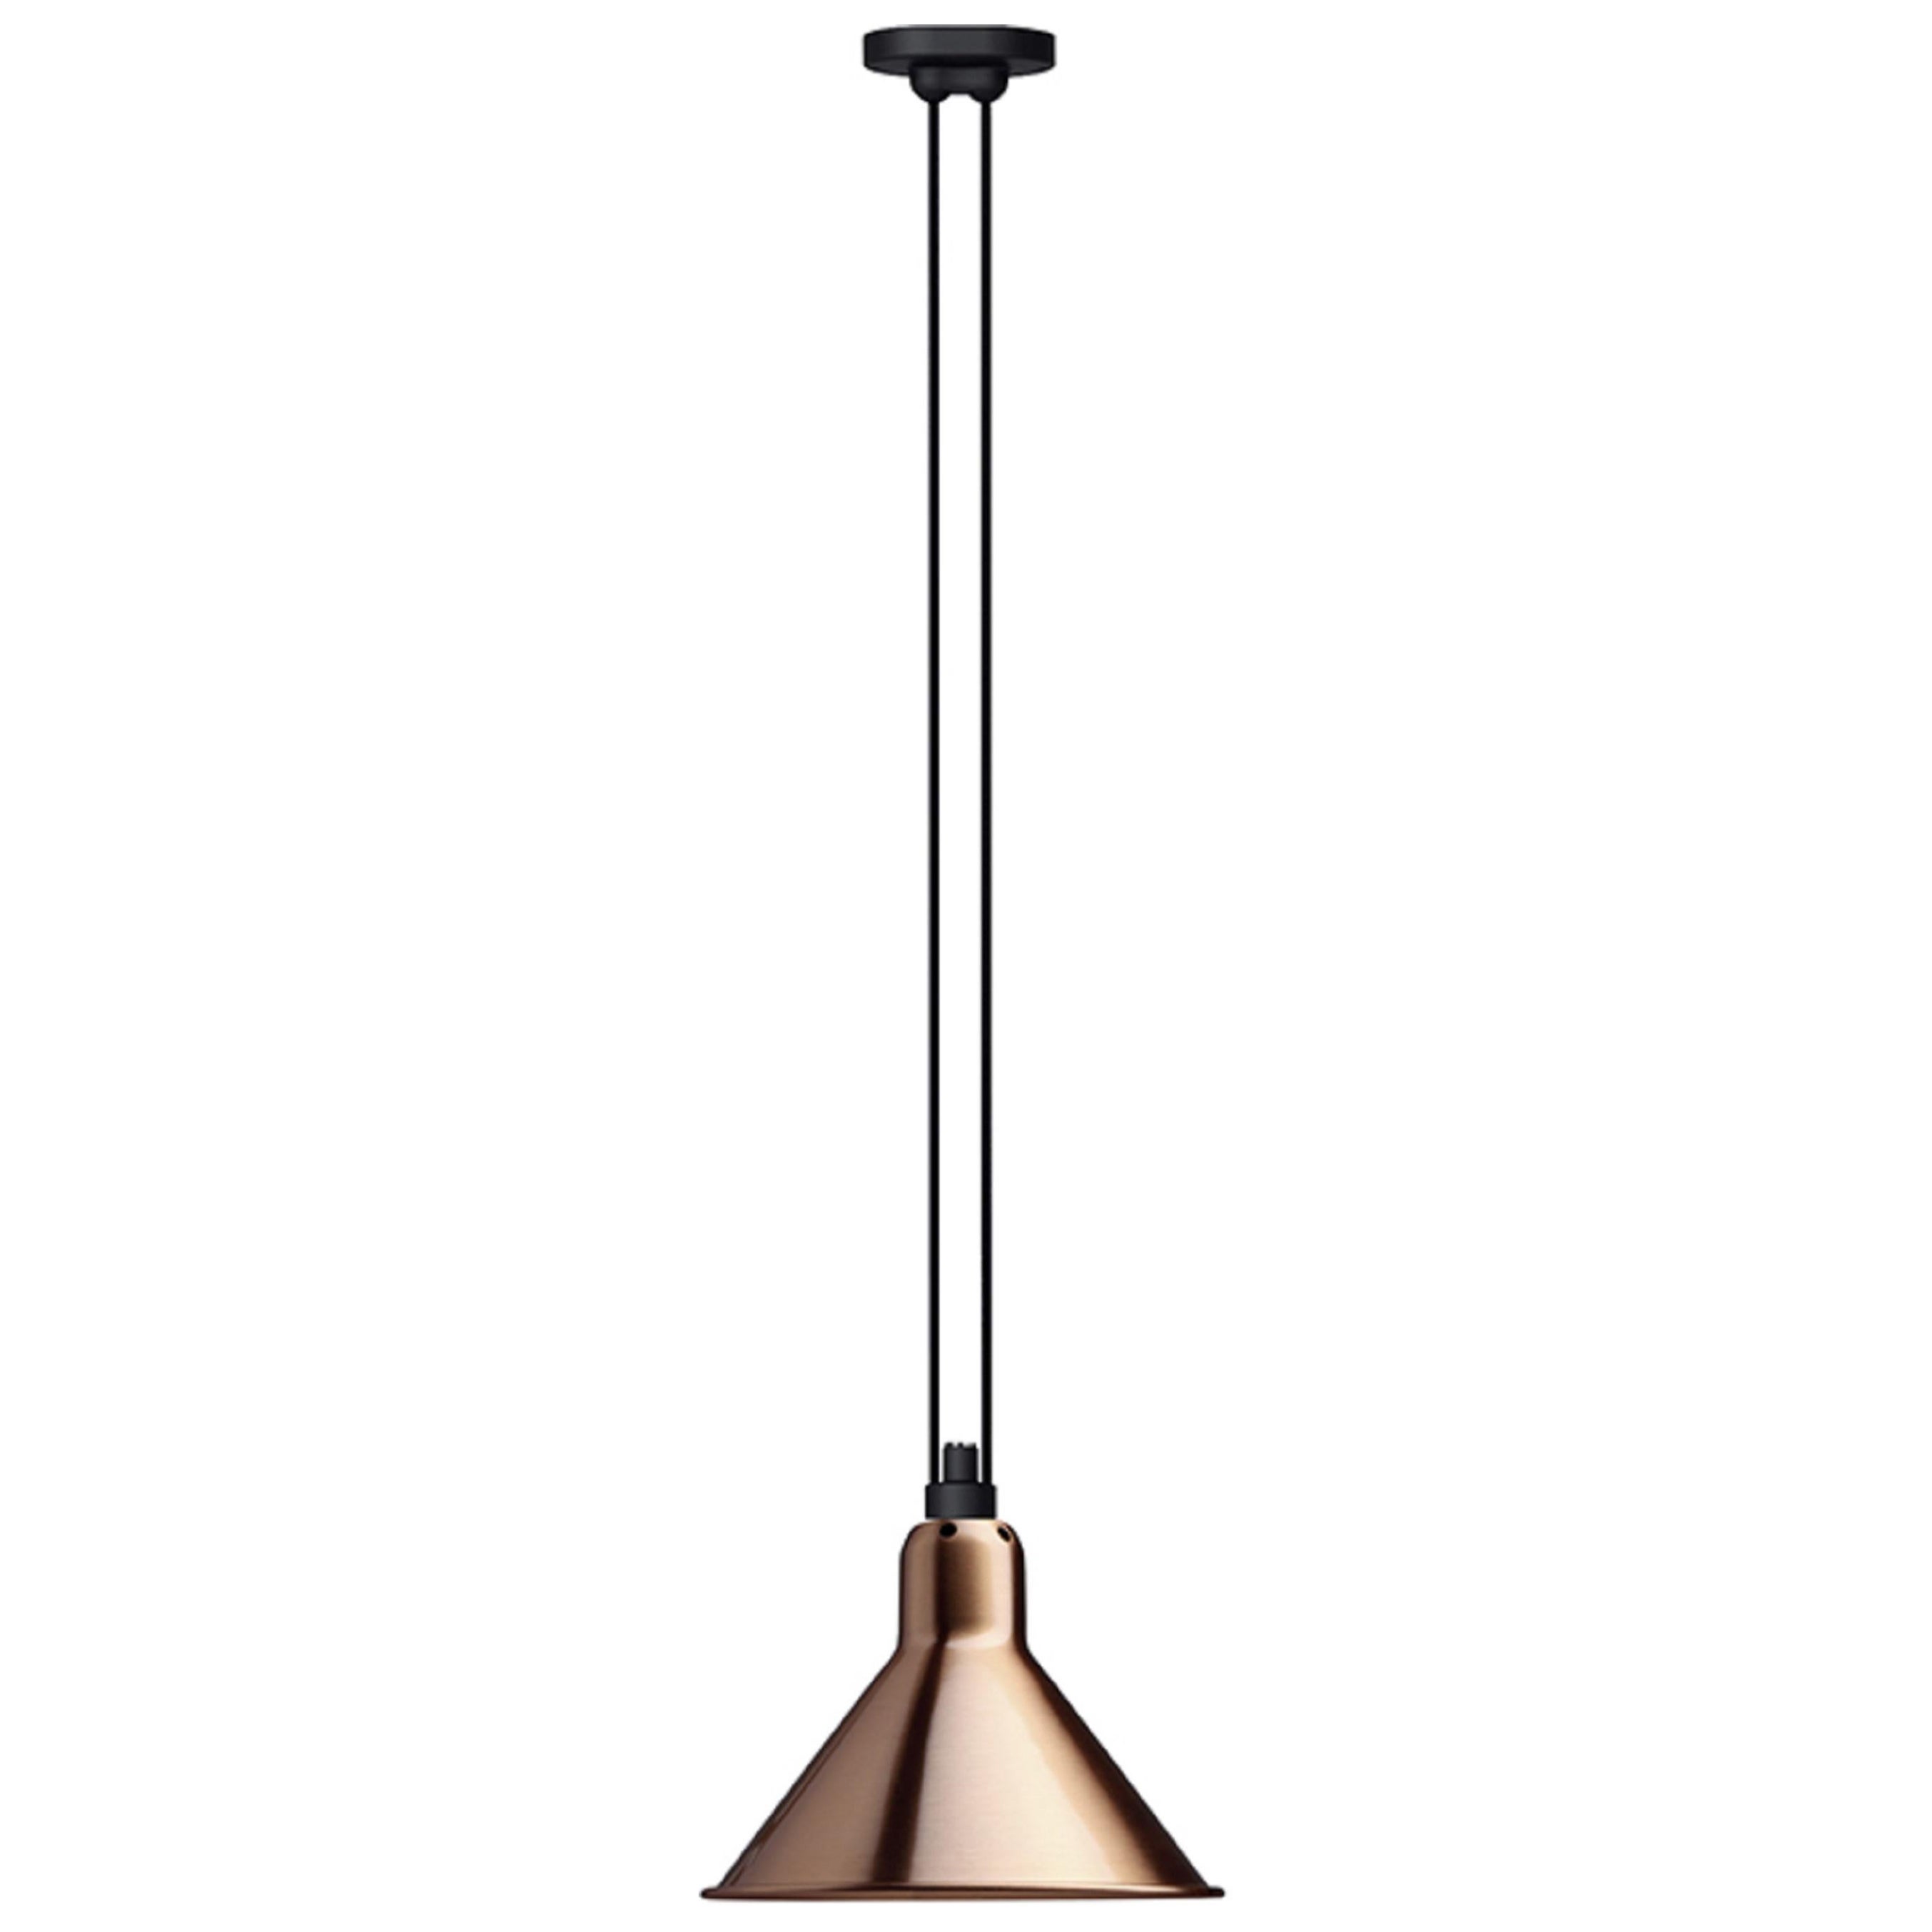 DCW Editions Les Acrobates N°322 Large Conic Pendant Lamp in Copper Shade